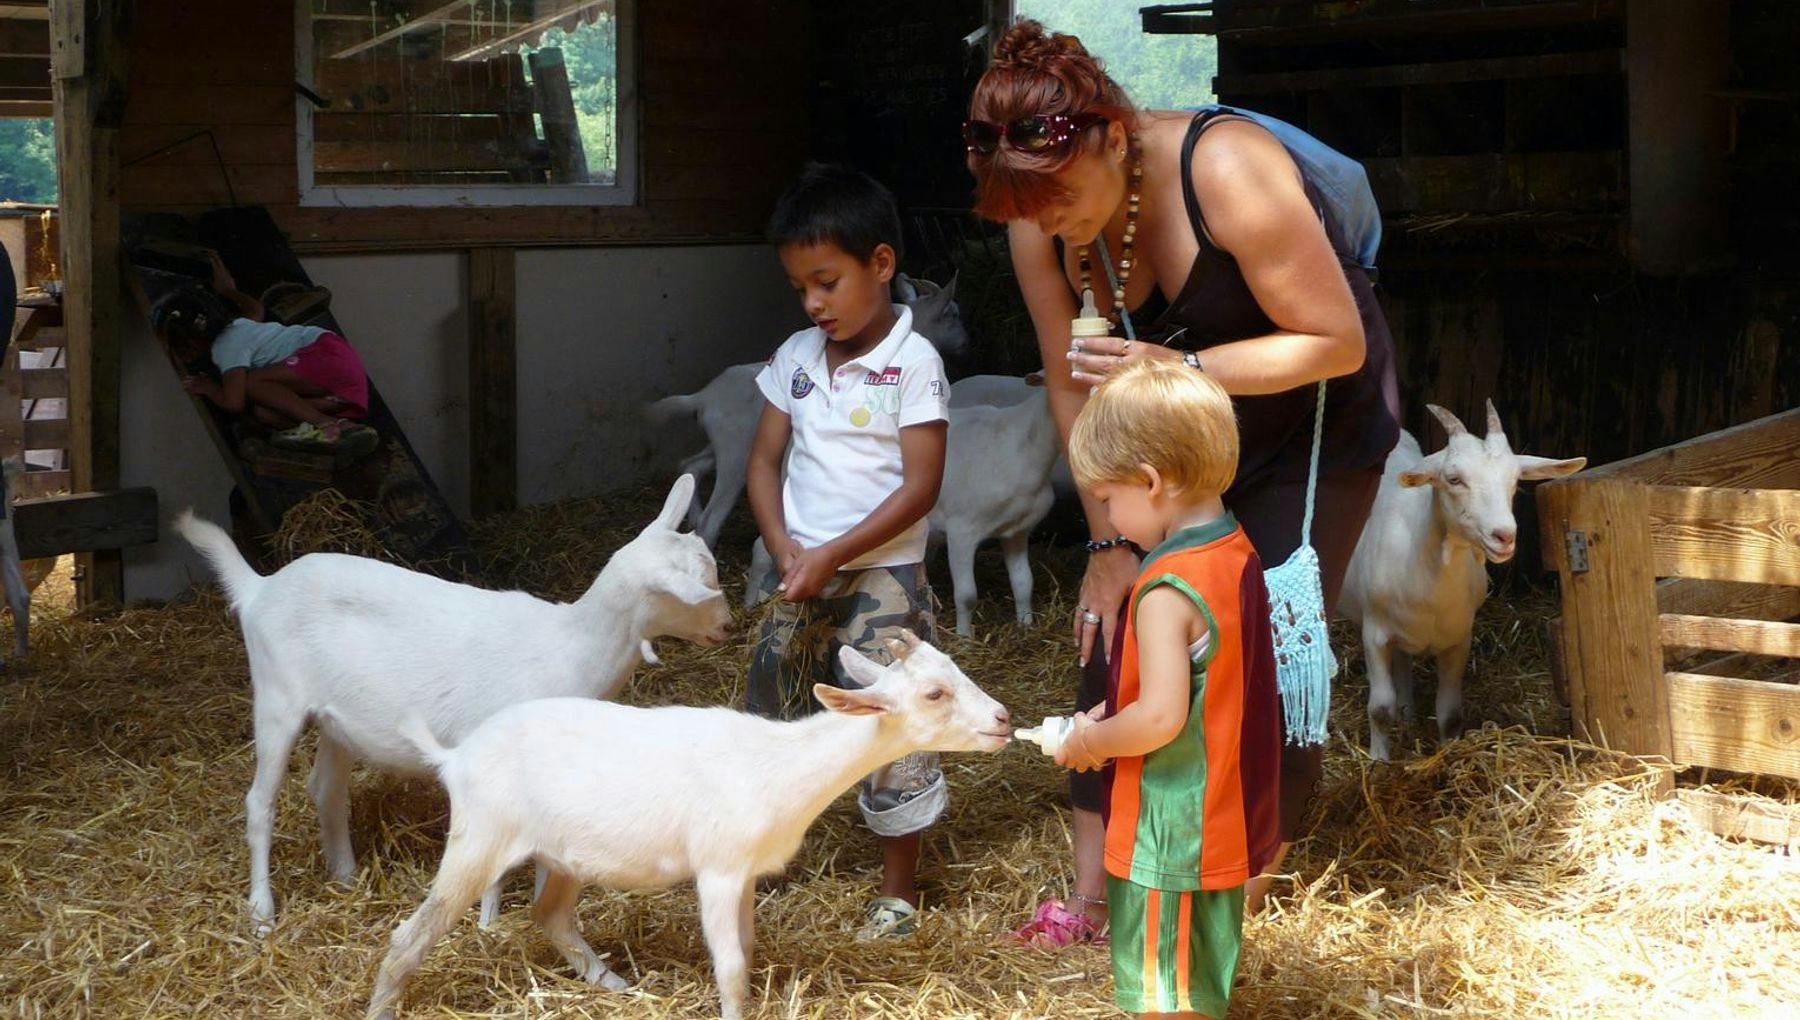 A woman and three children at the Amsterdamse Bos Goat Farm Ridammerhoeve Geitenboerderij to feed young goats